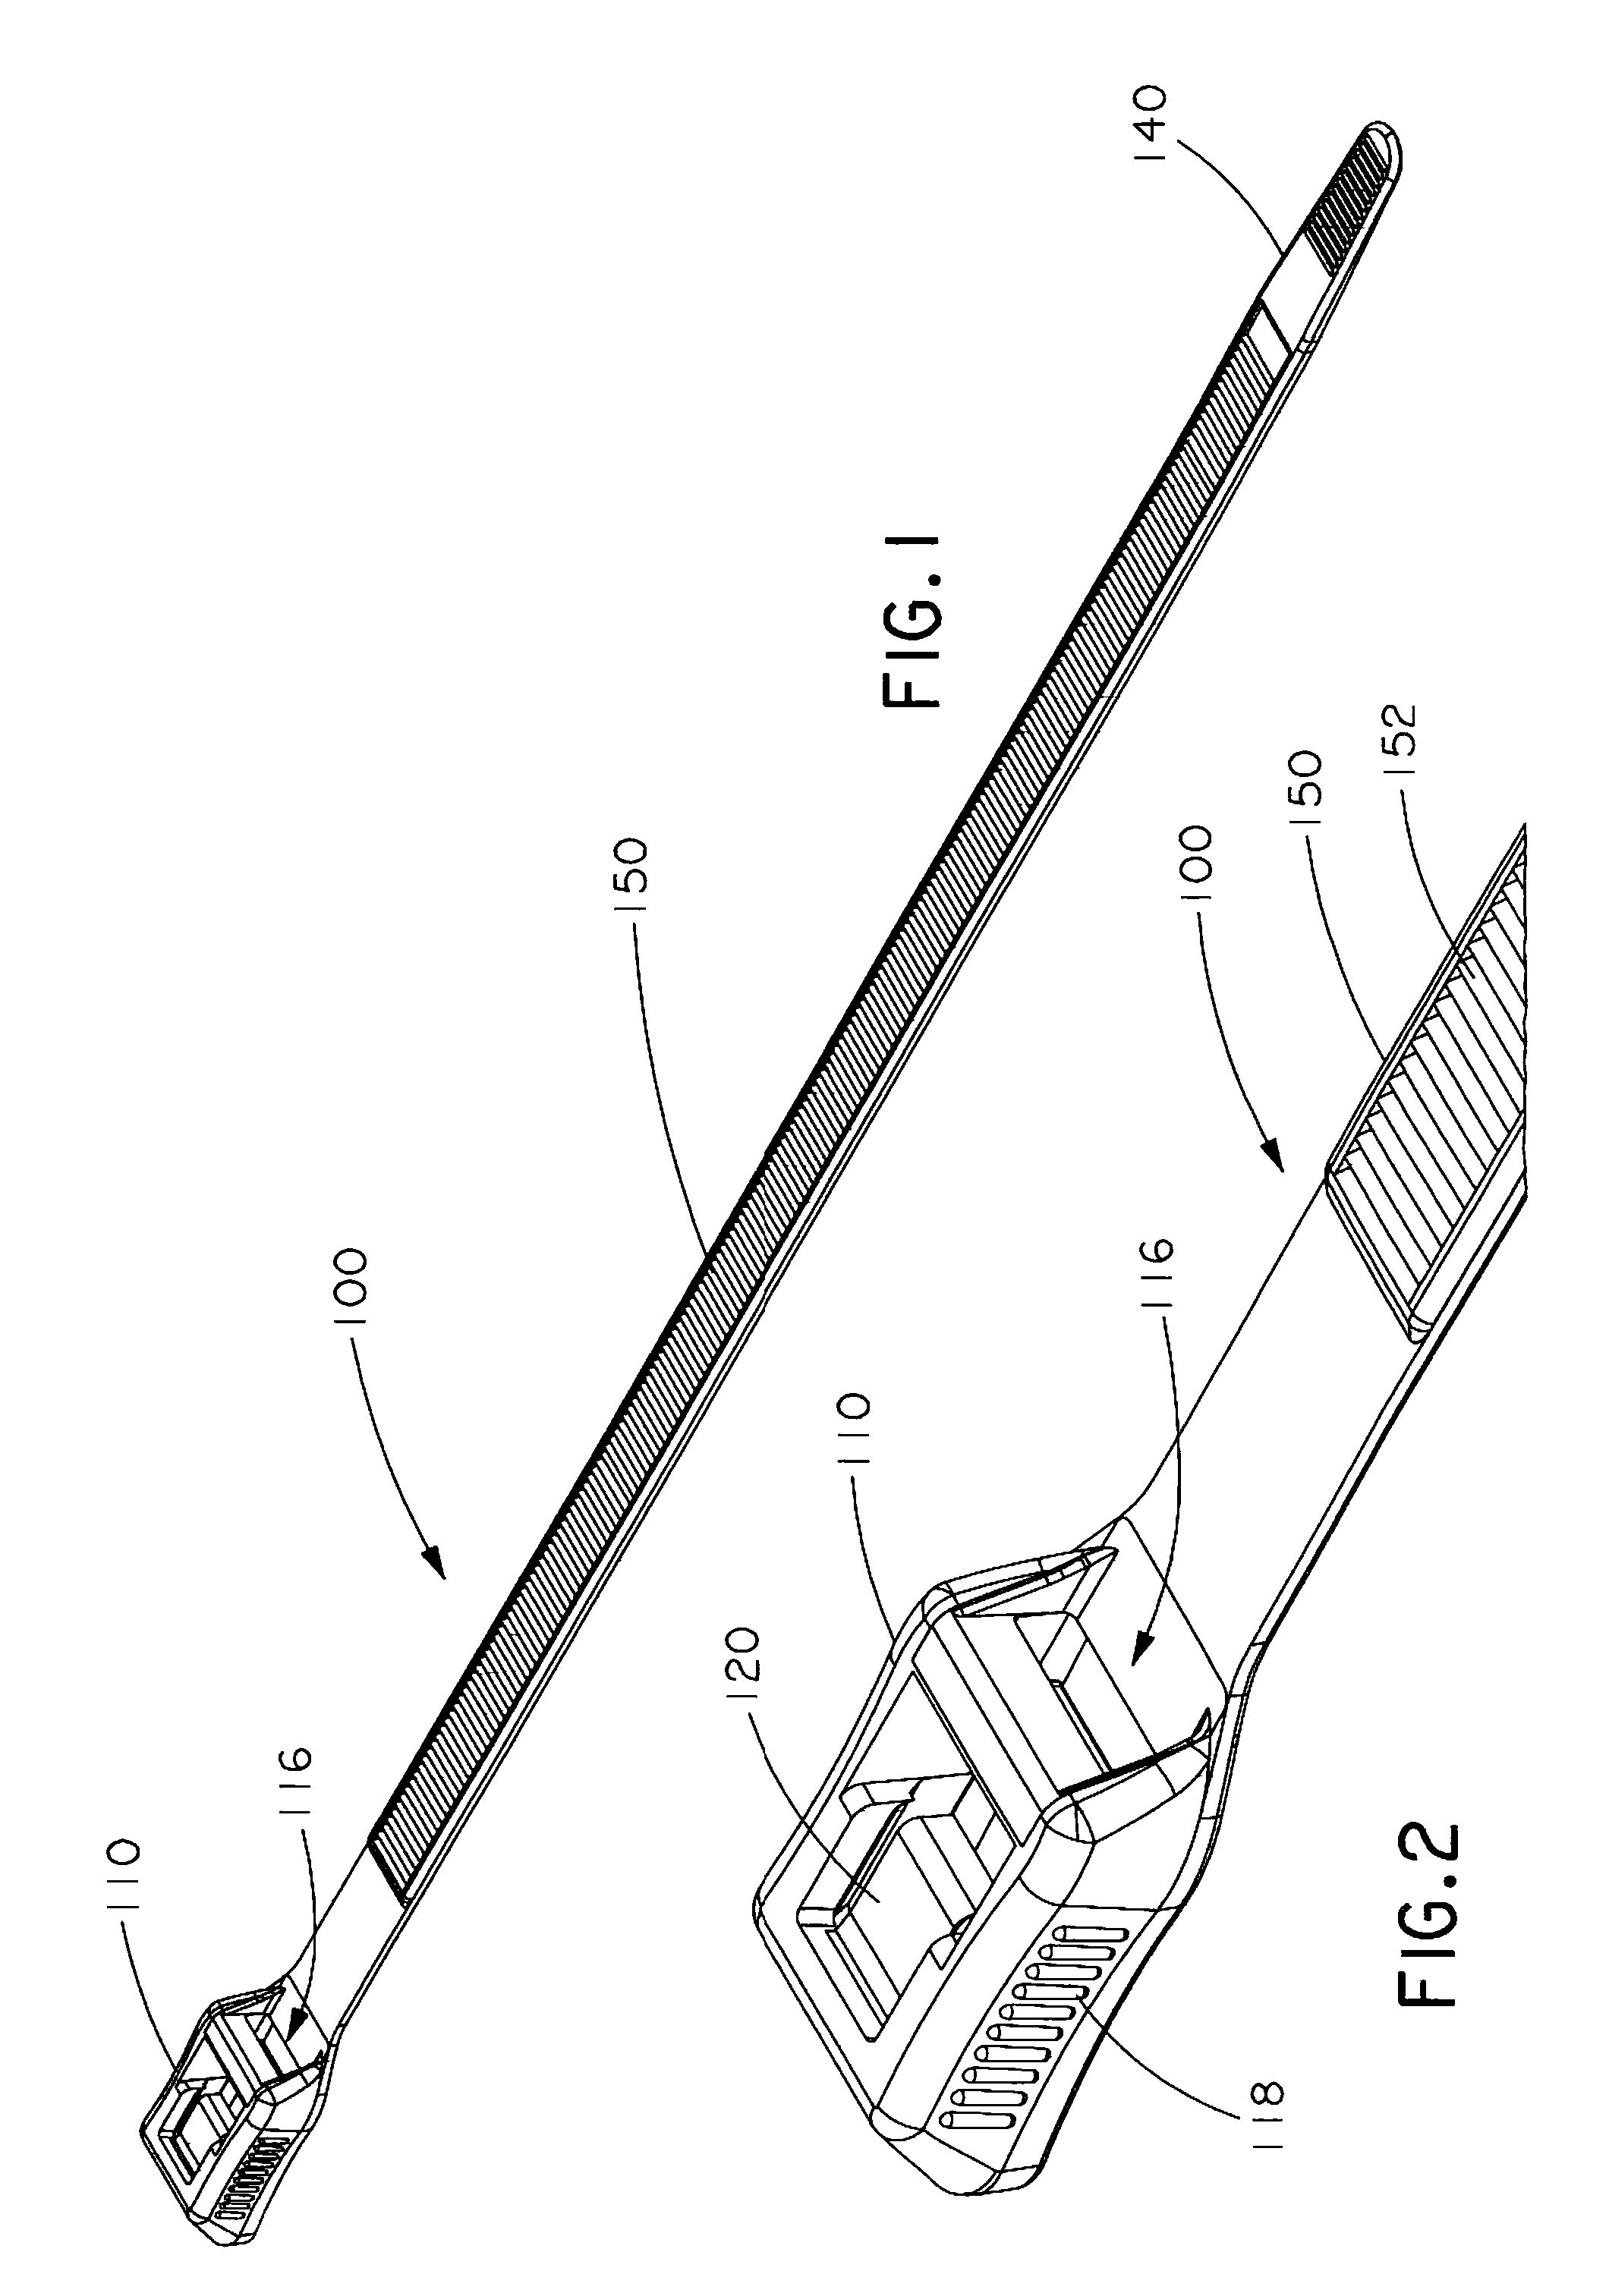 In-line cable tie with fixed and hinged locking mechanisms